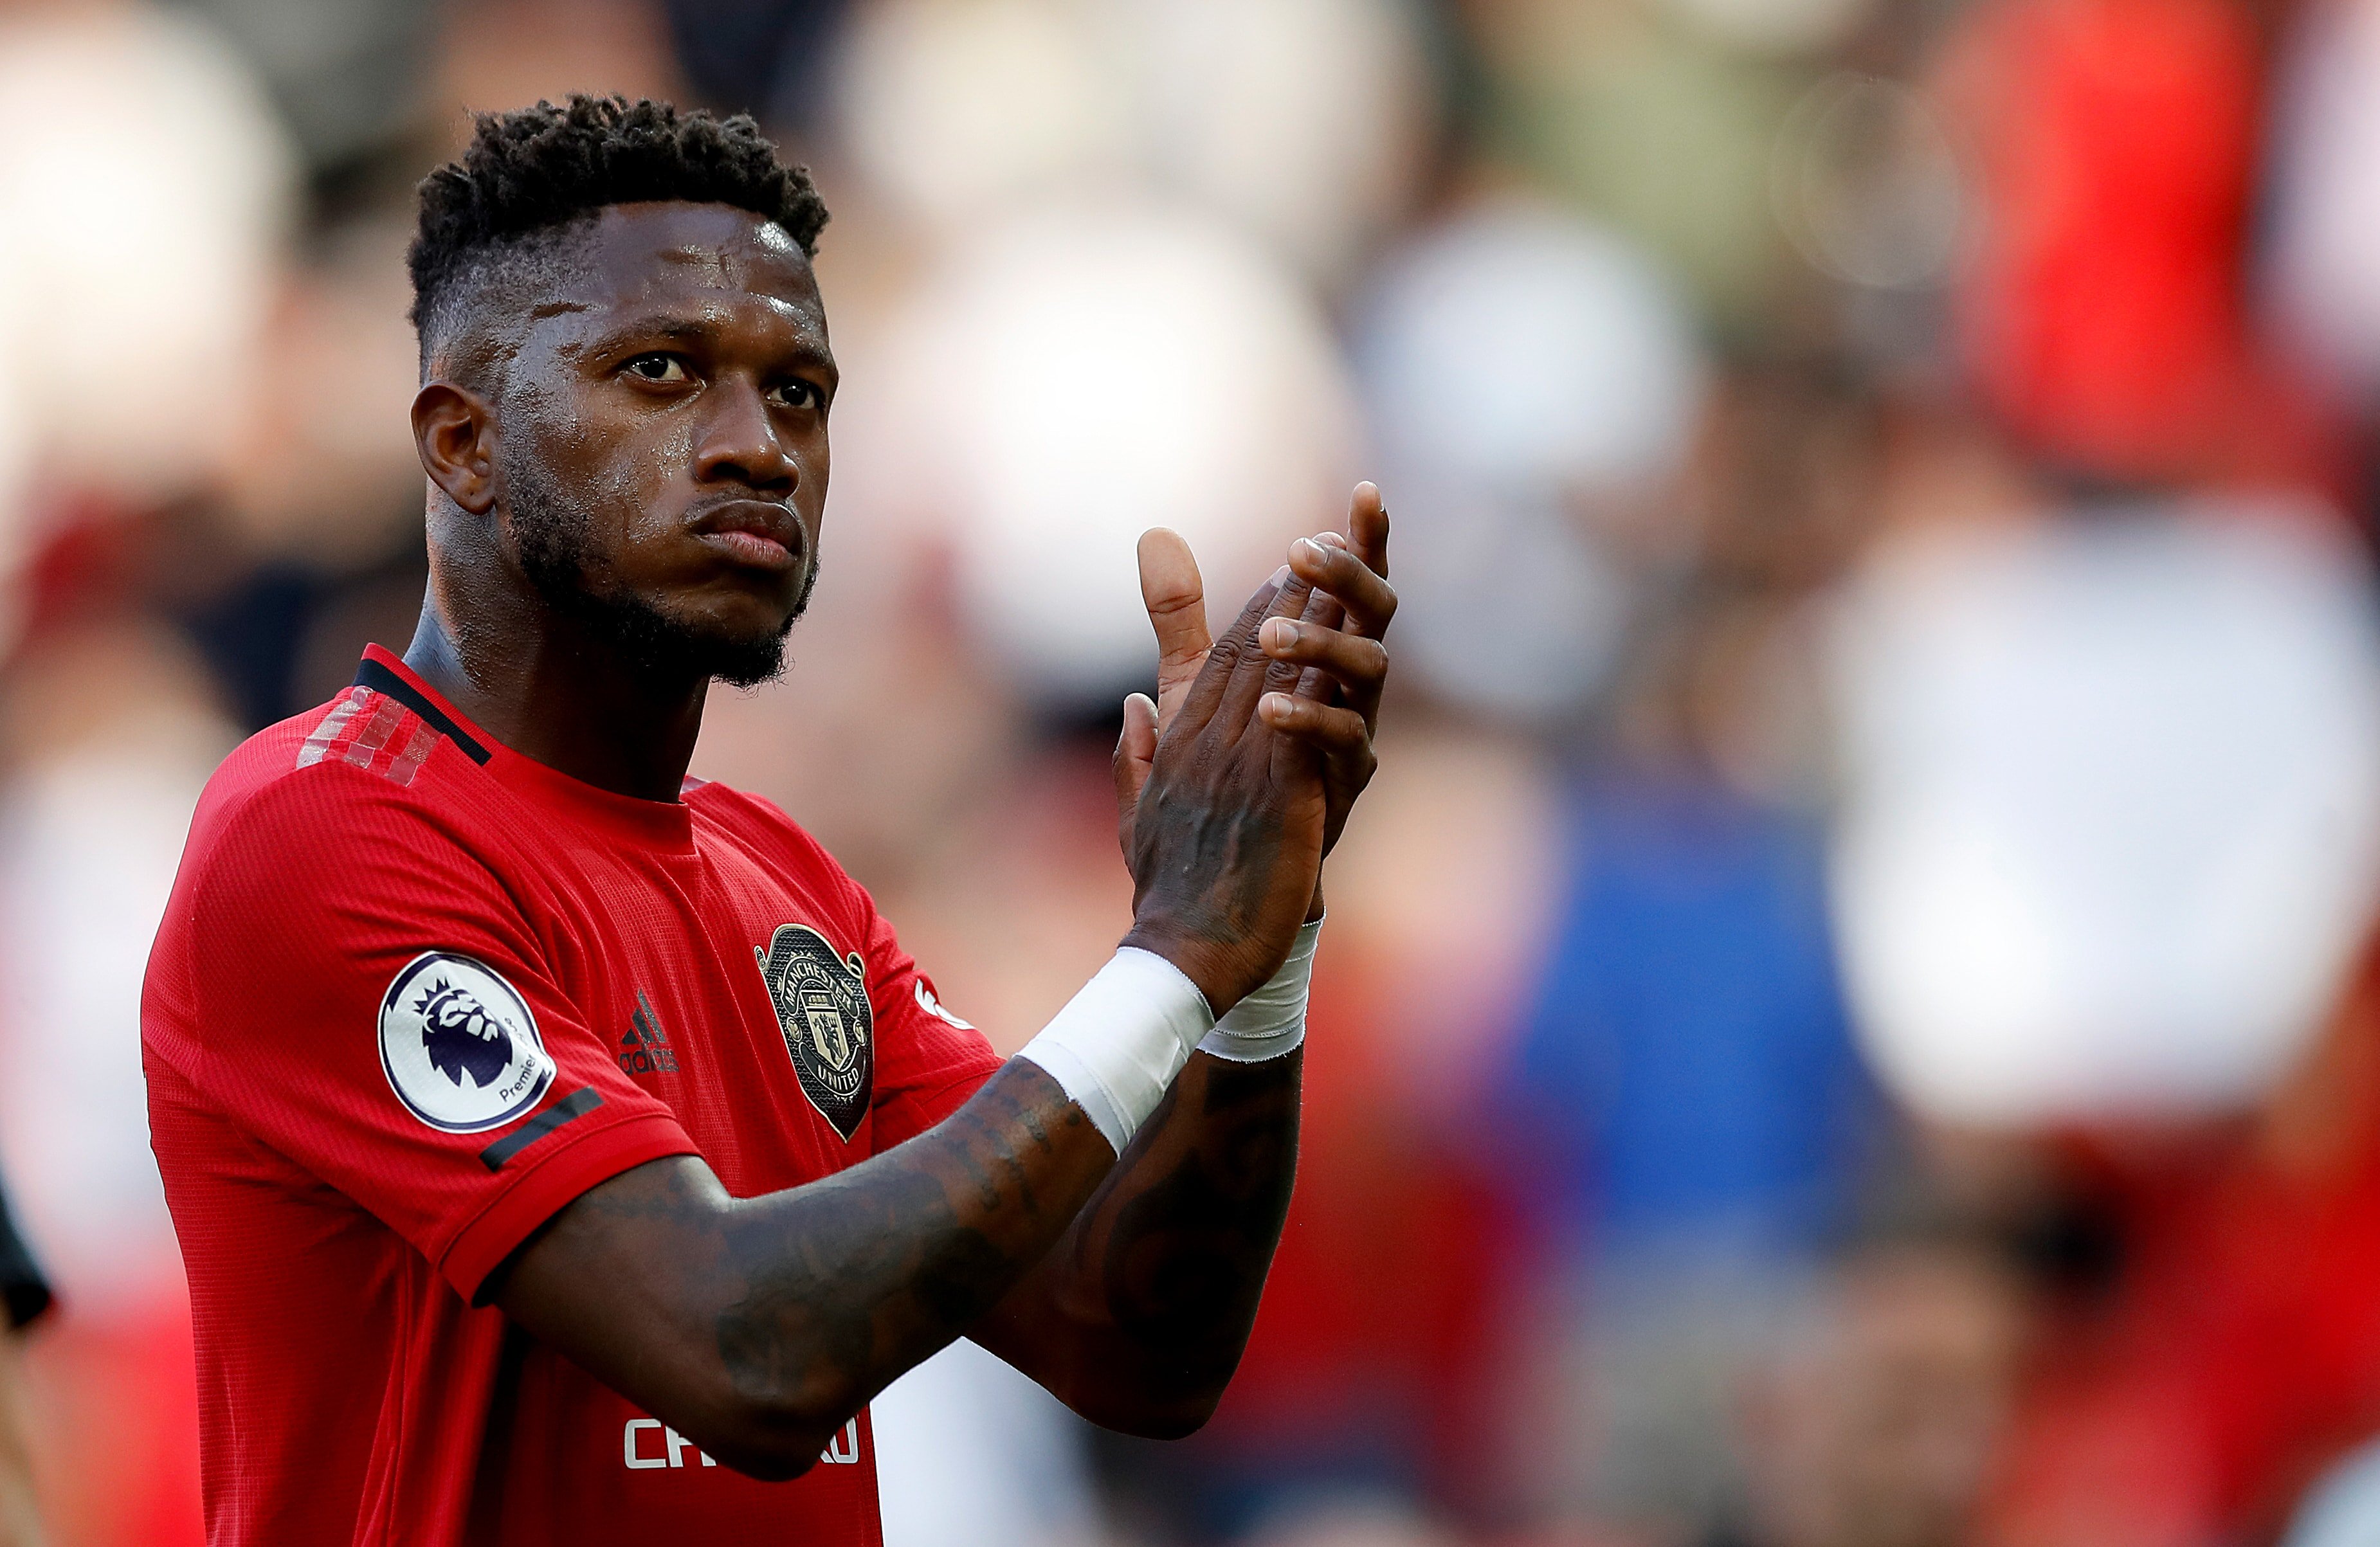 ‘We have to shut up and work’ – Fred tells Man Utd team-mates